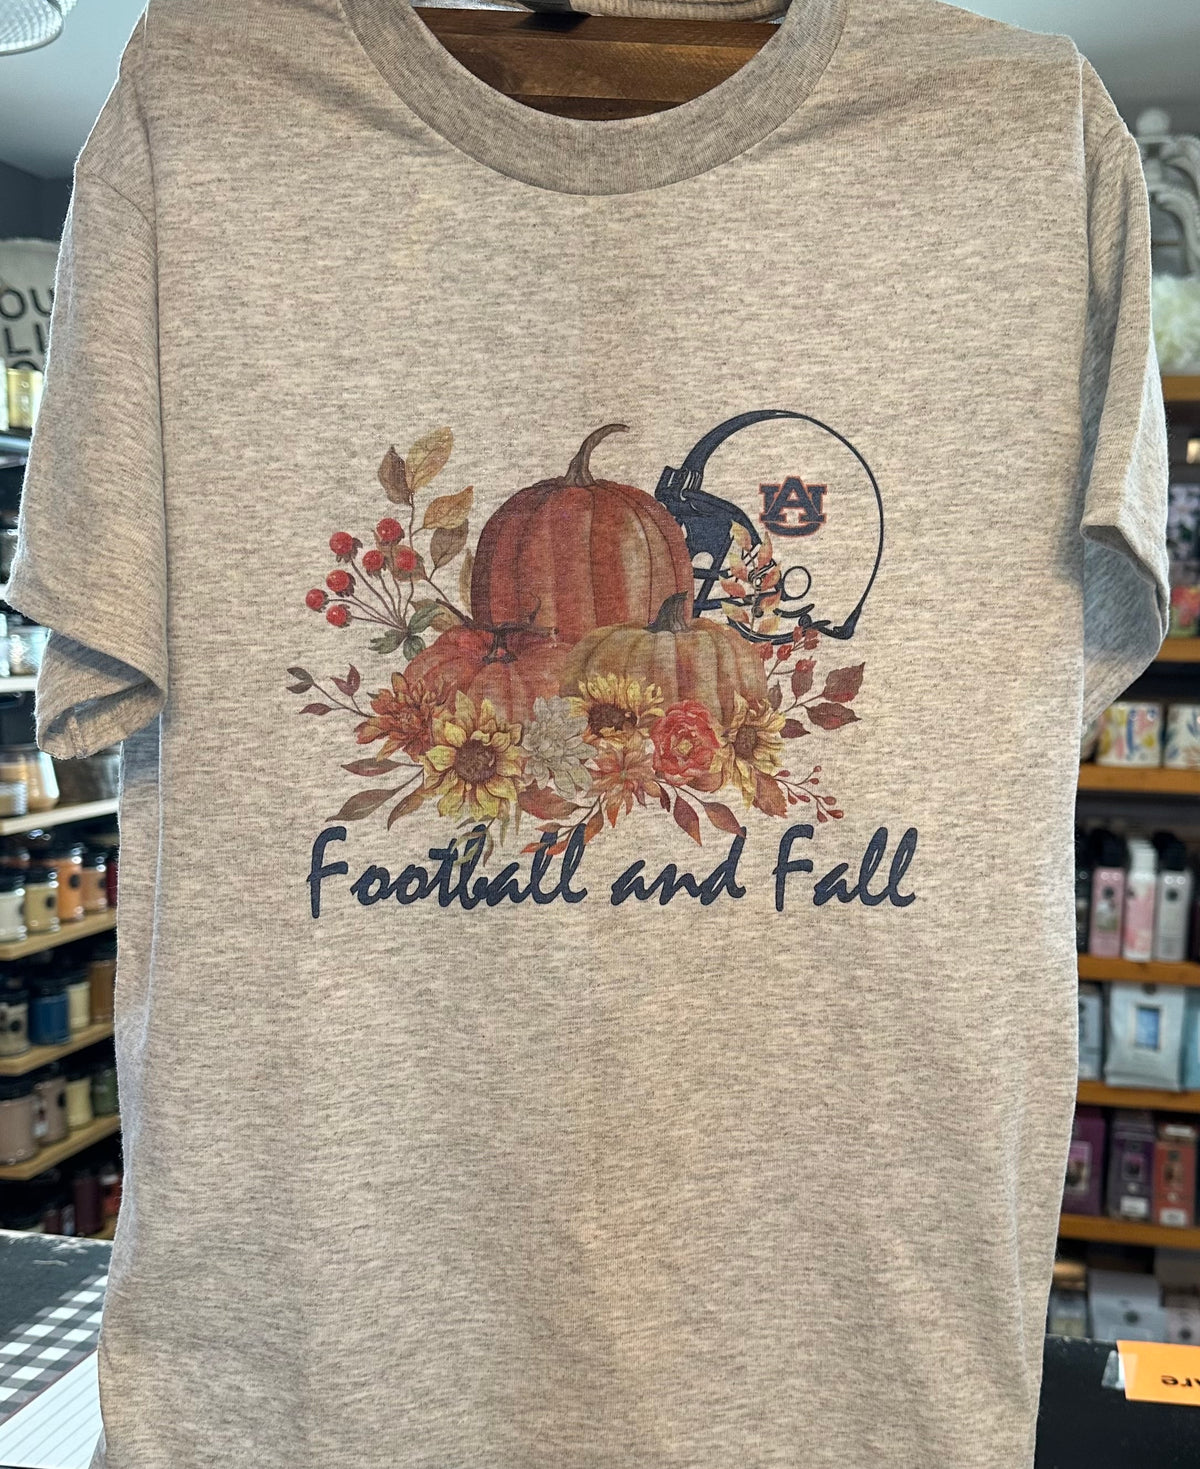 Auburn Football and Fall Graphic Top